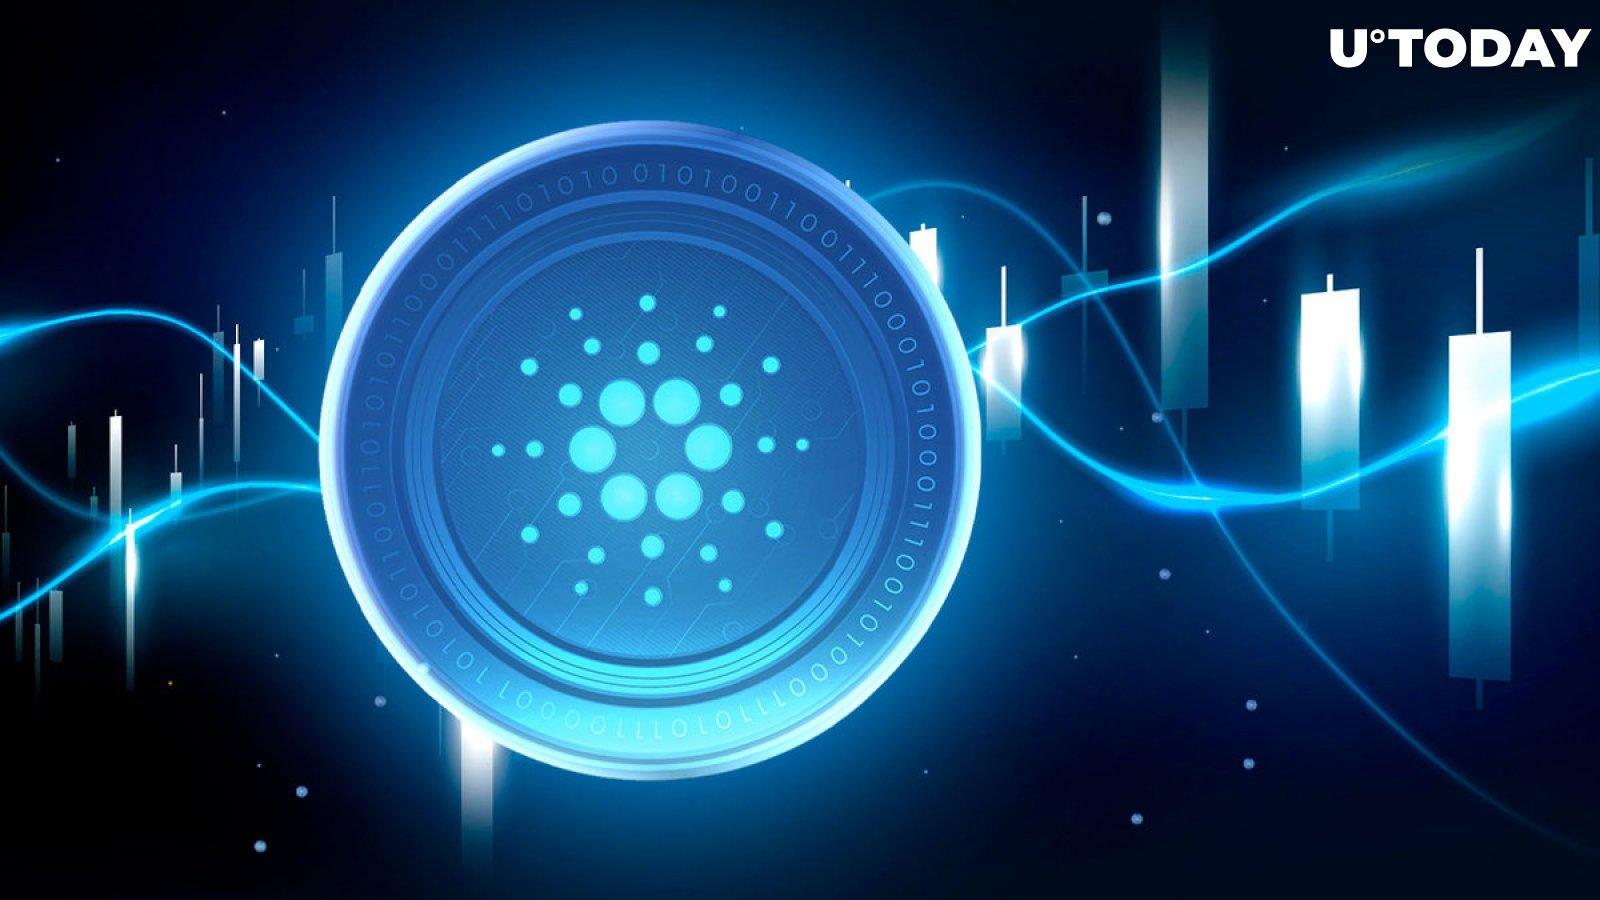 Cardano (ADA) Sees Epic 28,372% Inflow Surge; Where Will This Lead?